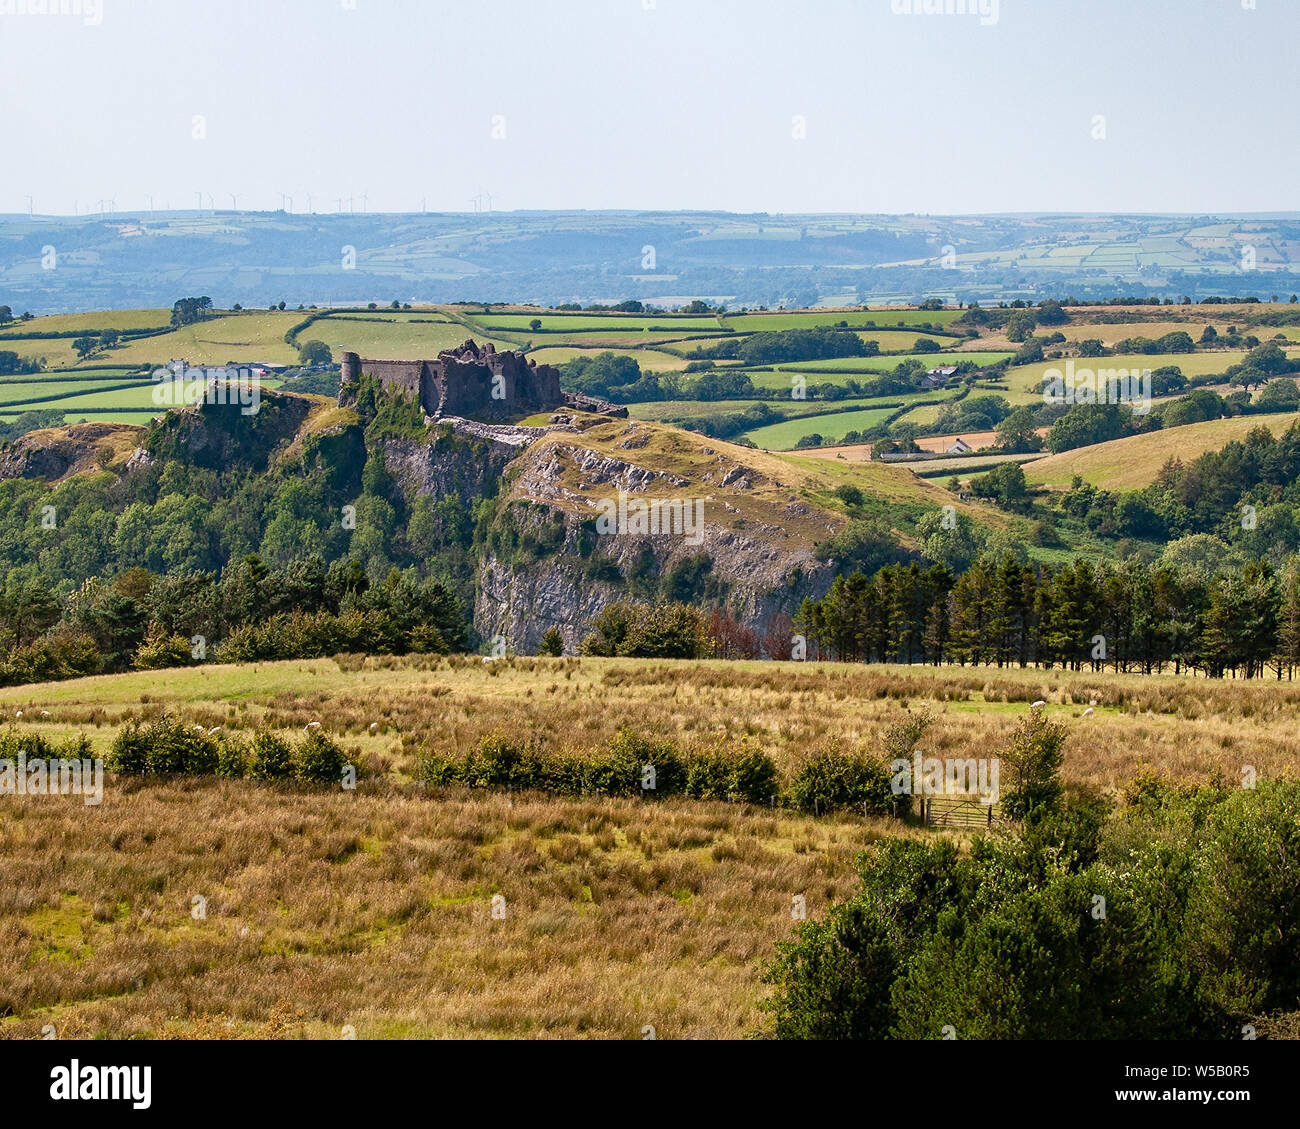 Carreg Cennen Castle in the Brecon Beacons National Park, viewed from the southwest. Wales, UK. Stock Photo